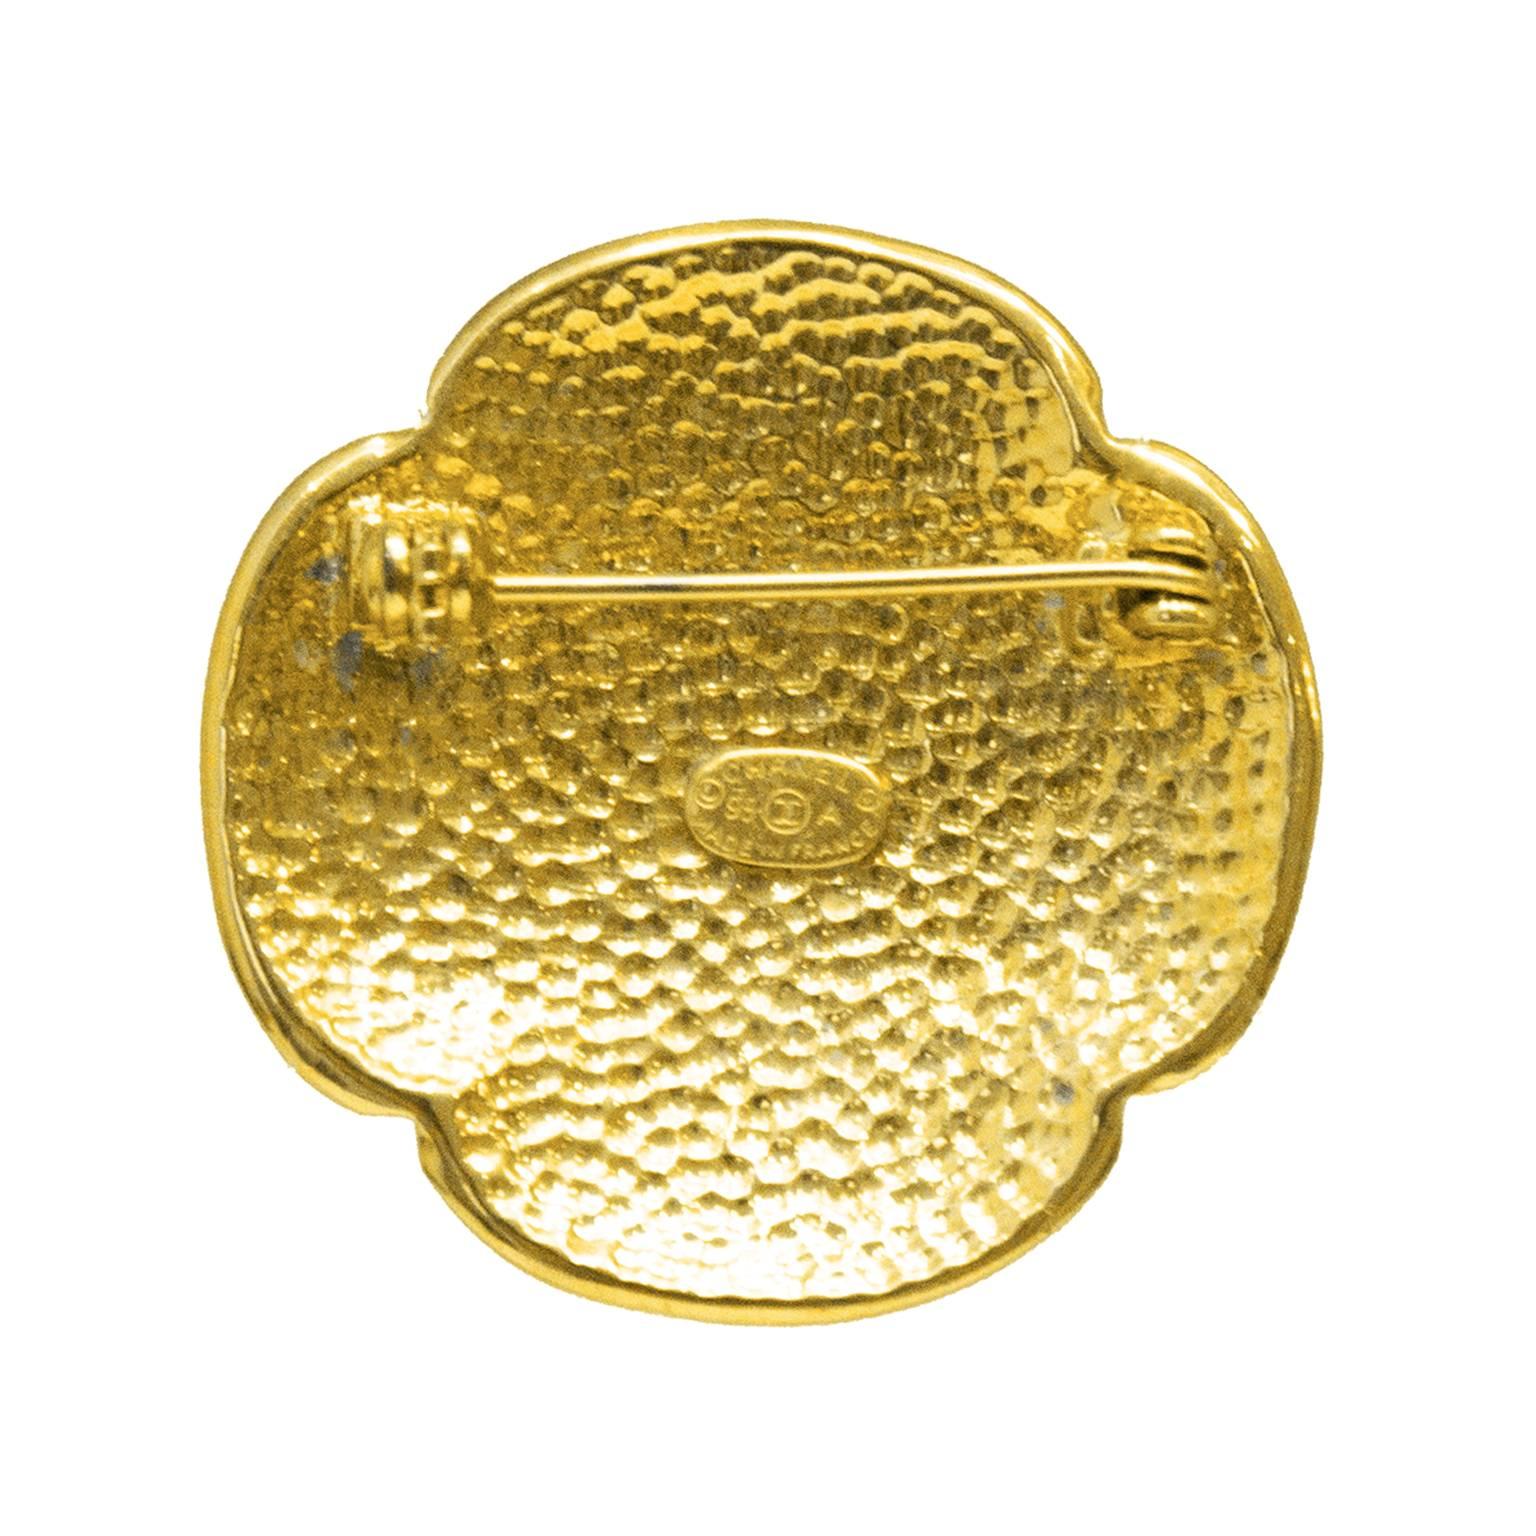 Chanel pin from the 1995 Fall collection. The petal shaped pin has a large CC at the center focal point and a textured background featuring the letters spelling CHANEL throughout. The underside is hammered and closes with a C clasp. In excellent